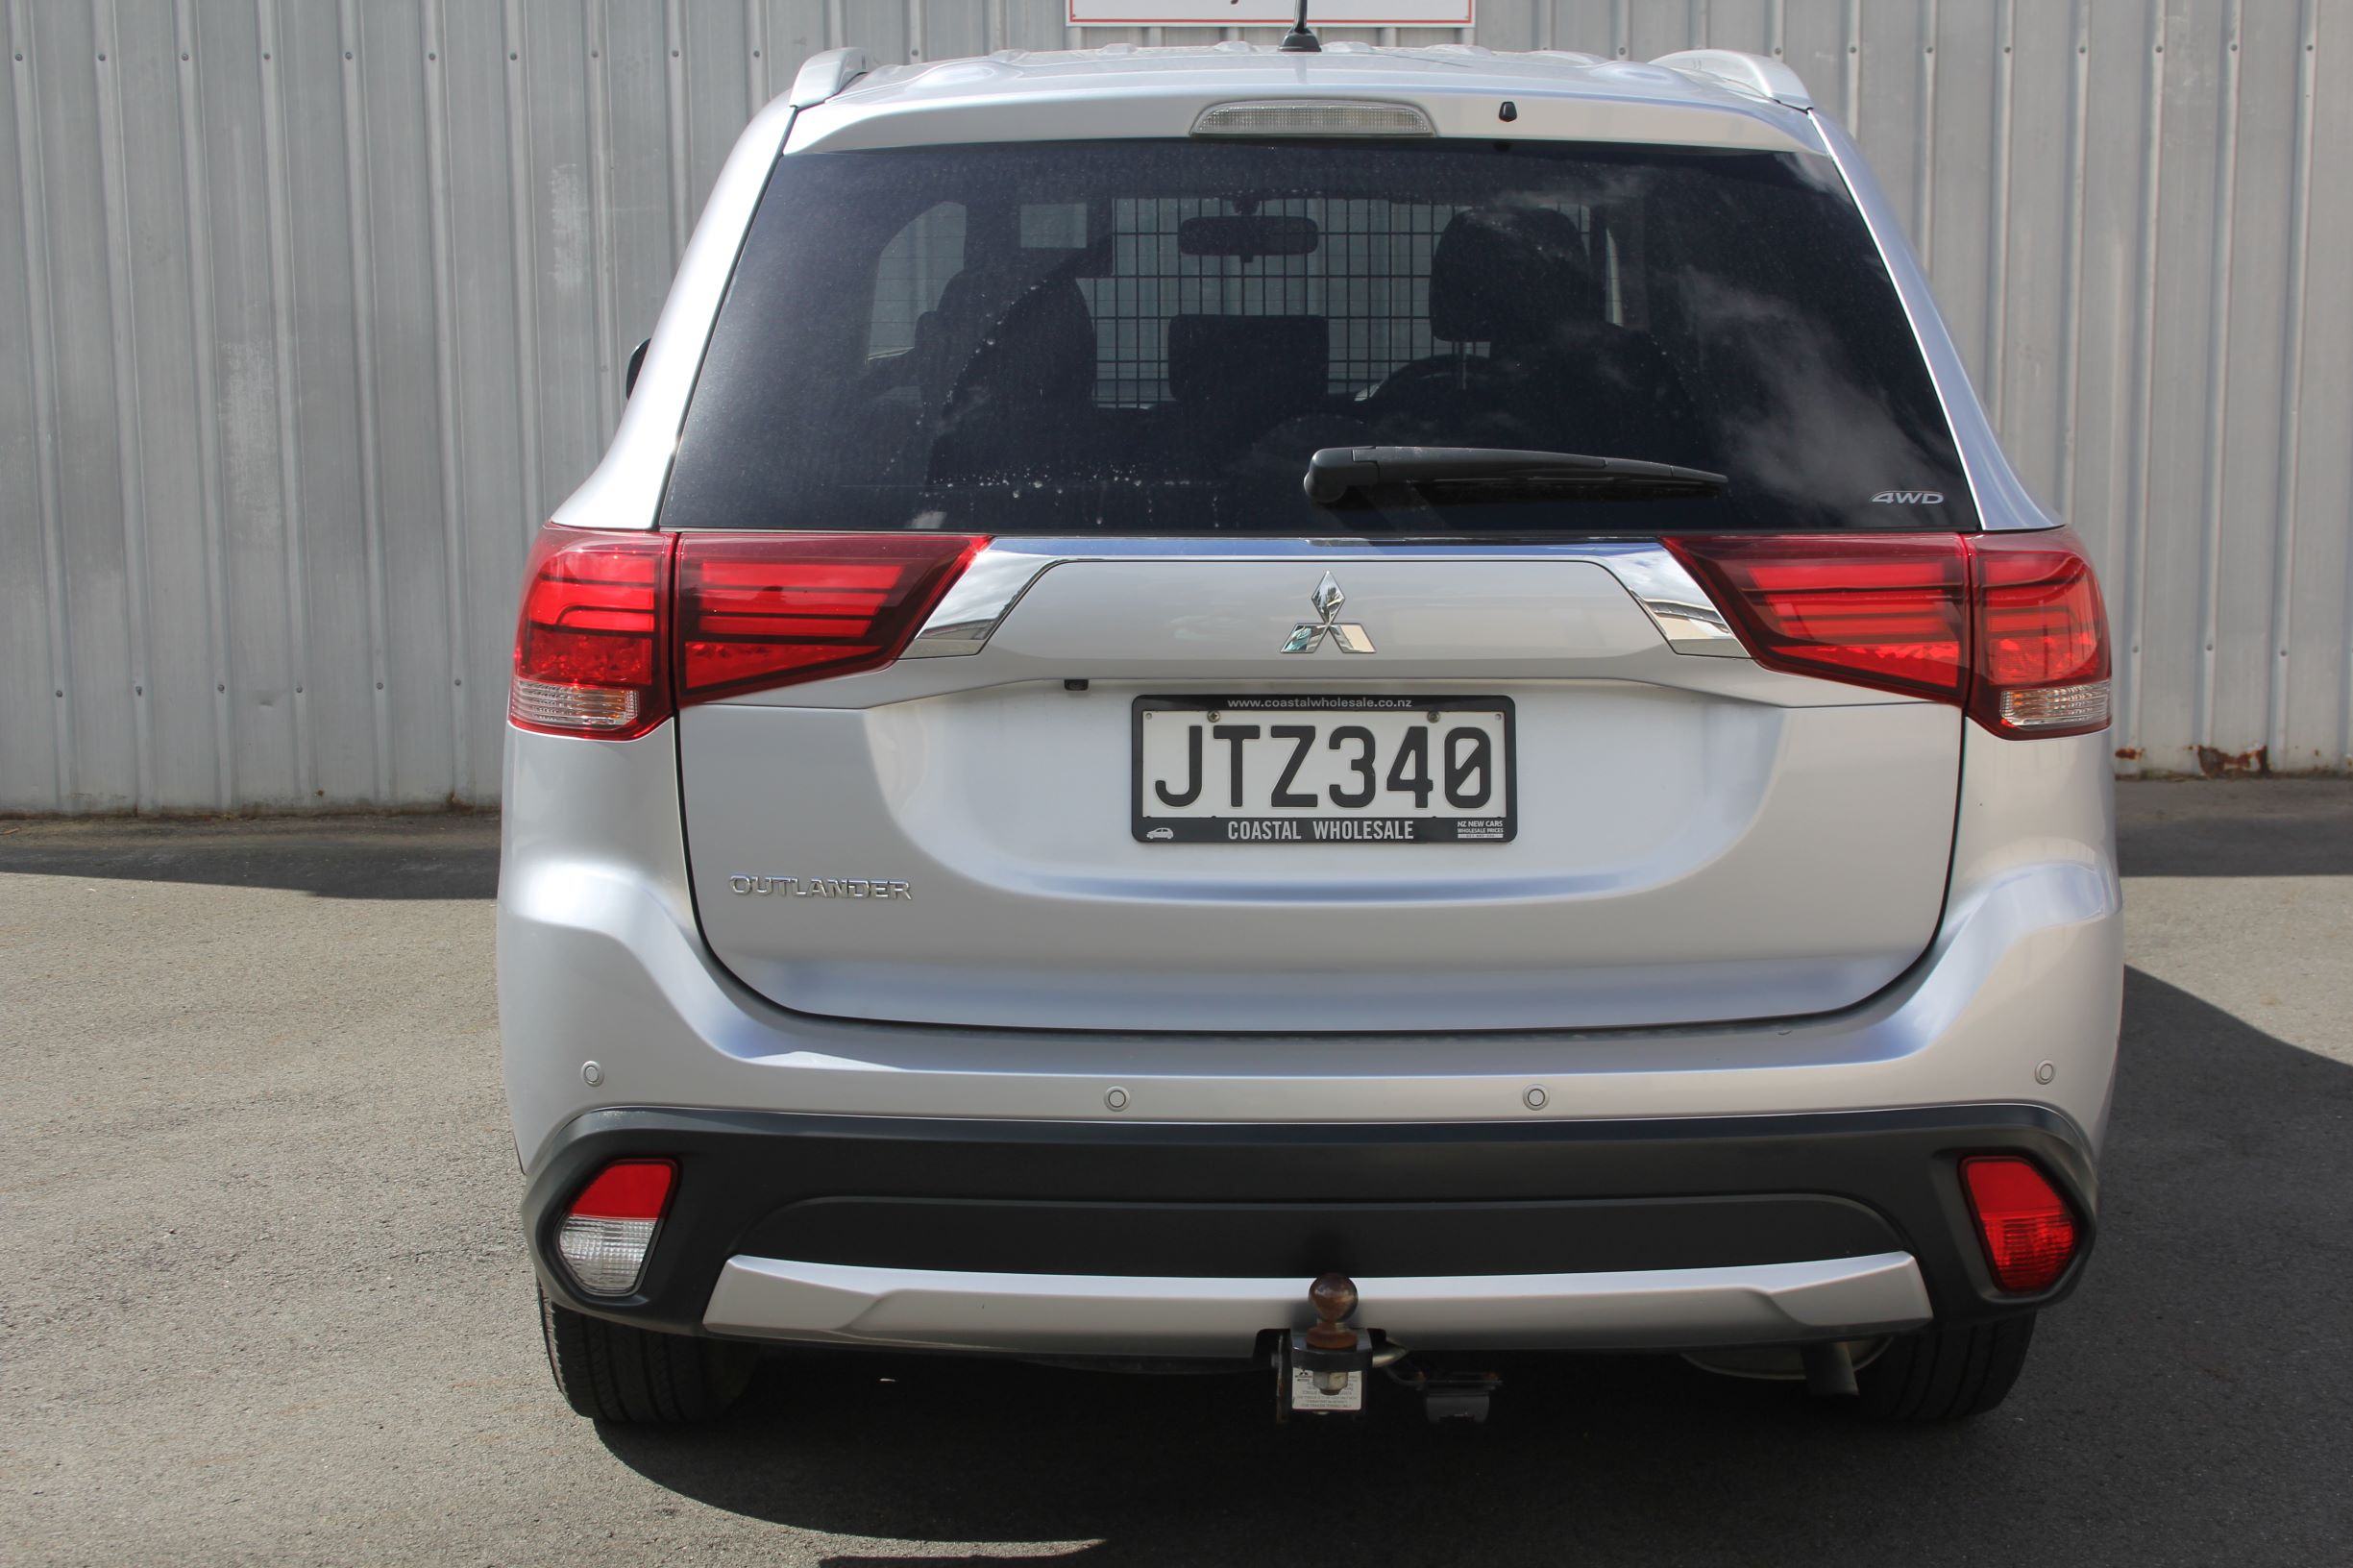 Mitsubishi OUTLANDER 4WD LS 2016 for sale in Auckland